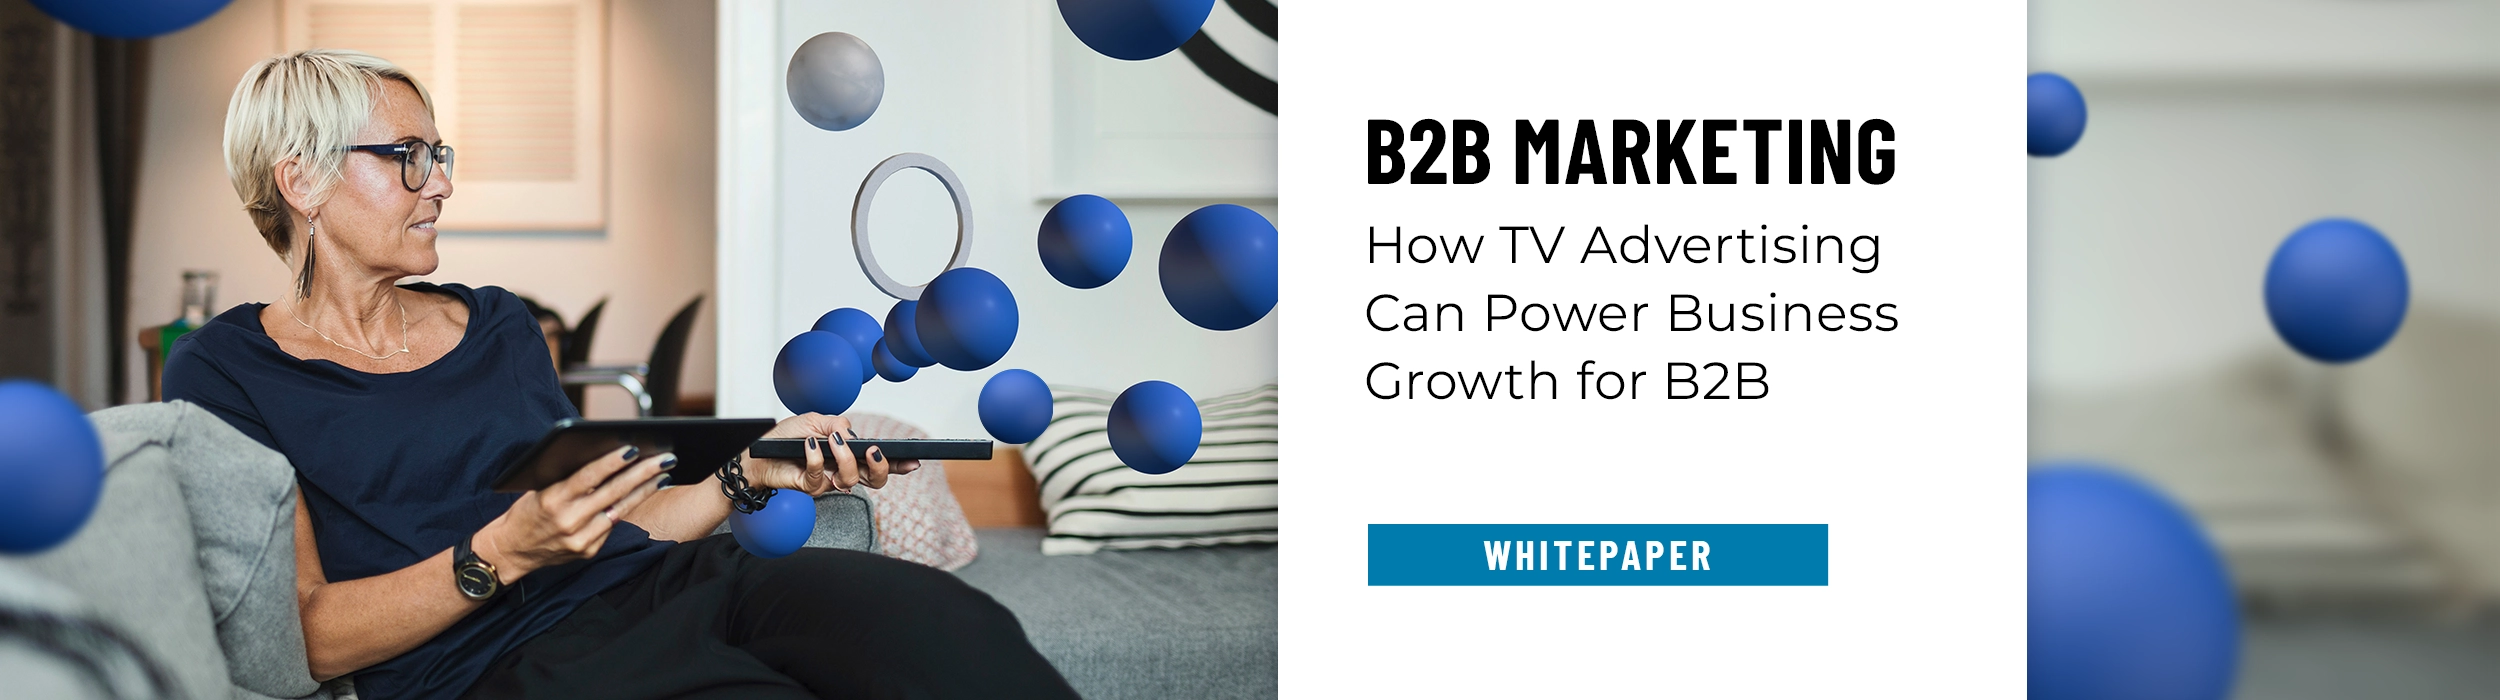 B2B Marketing: How TV Advertising Can Power Business Growth for B2B